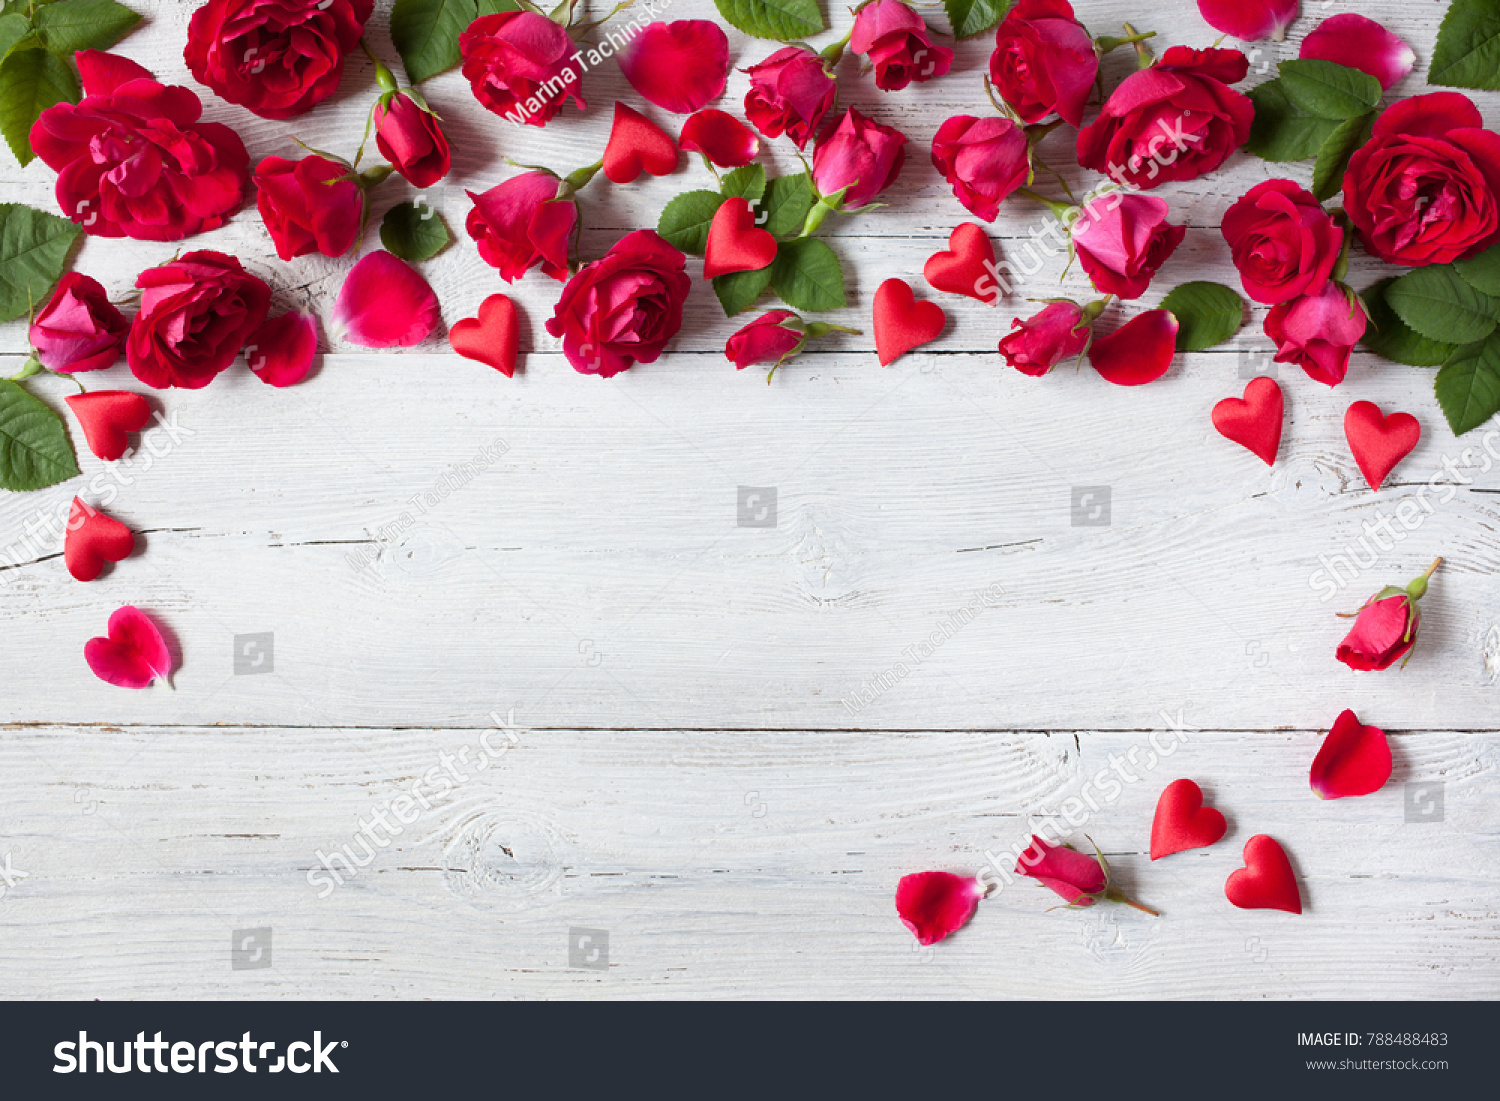 Roses and red hearts on a wooden background #788488483